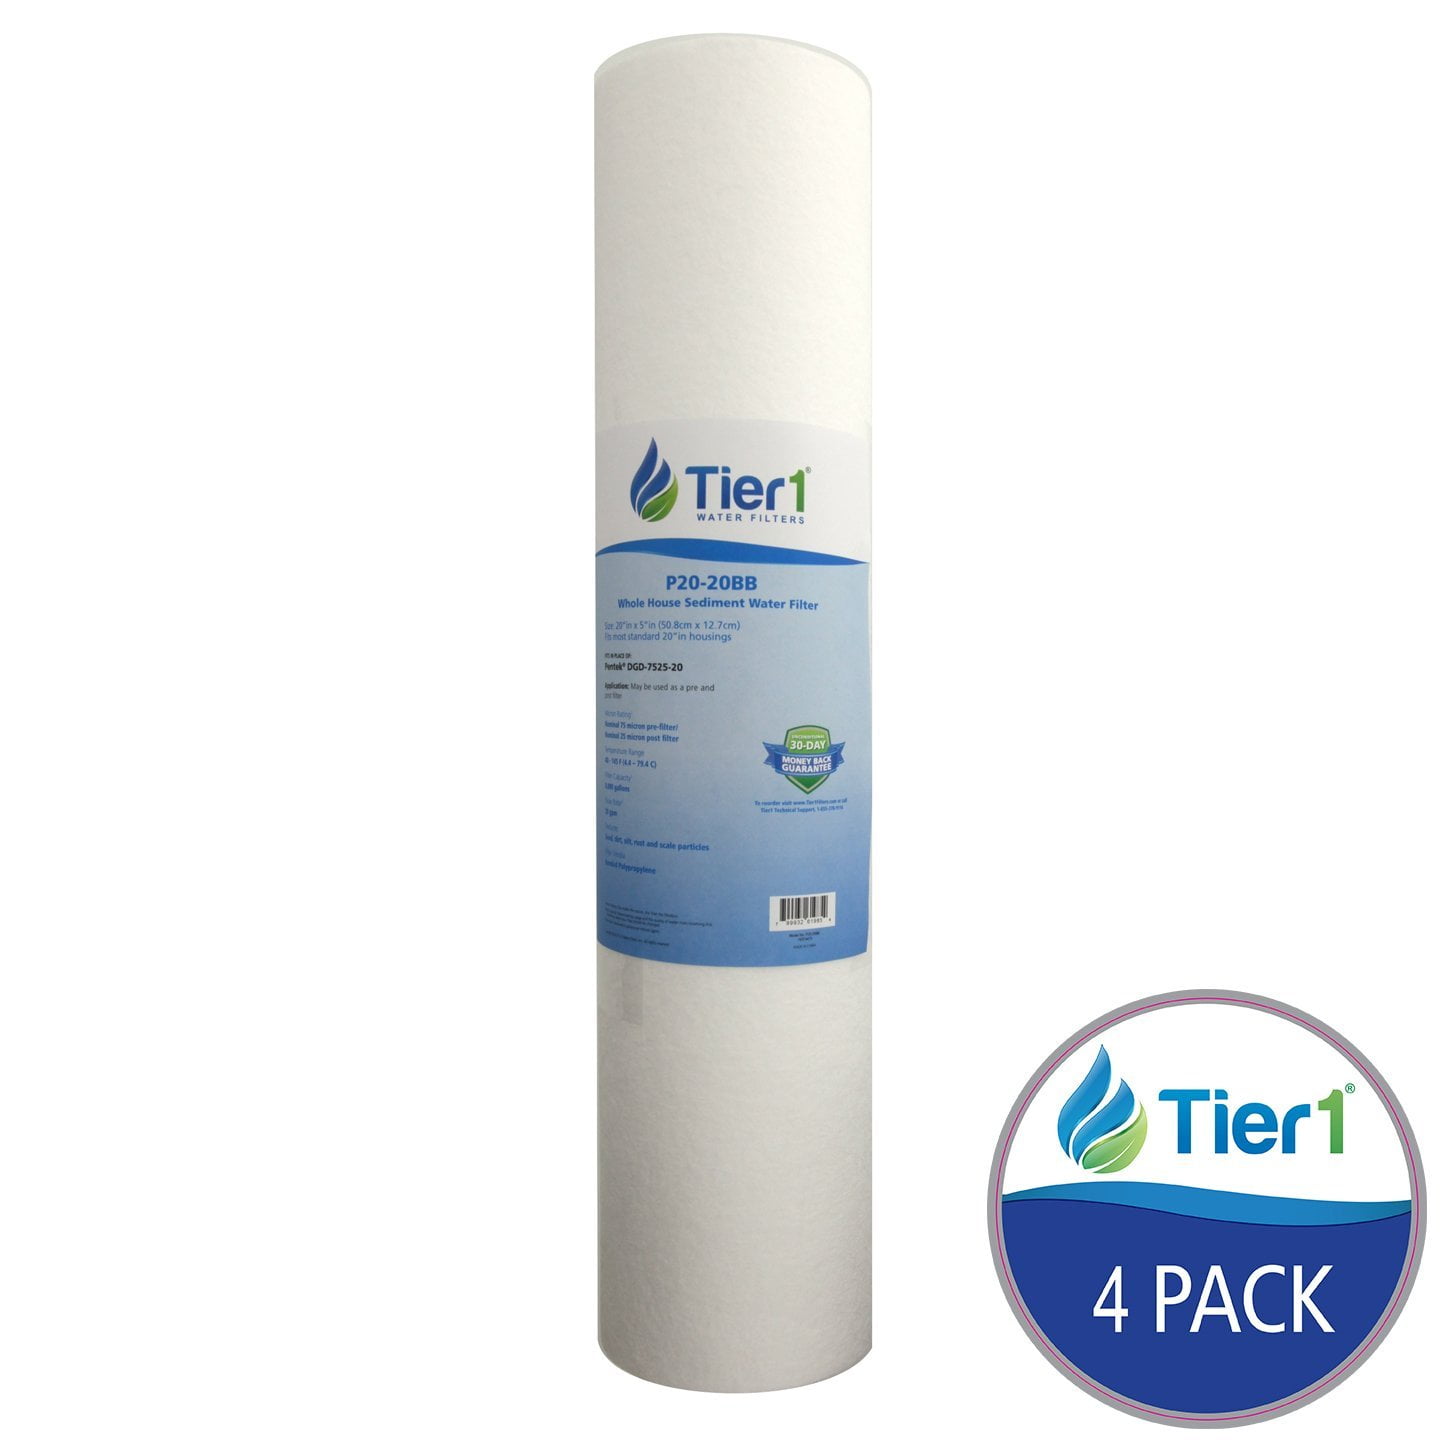 Pentek DGD-7525 25 Micron Whole House 10 Inch Sediment Water Filter 6 Pack 